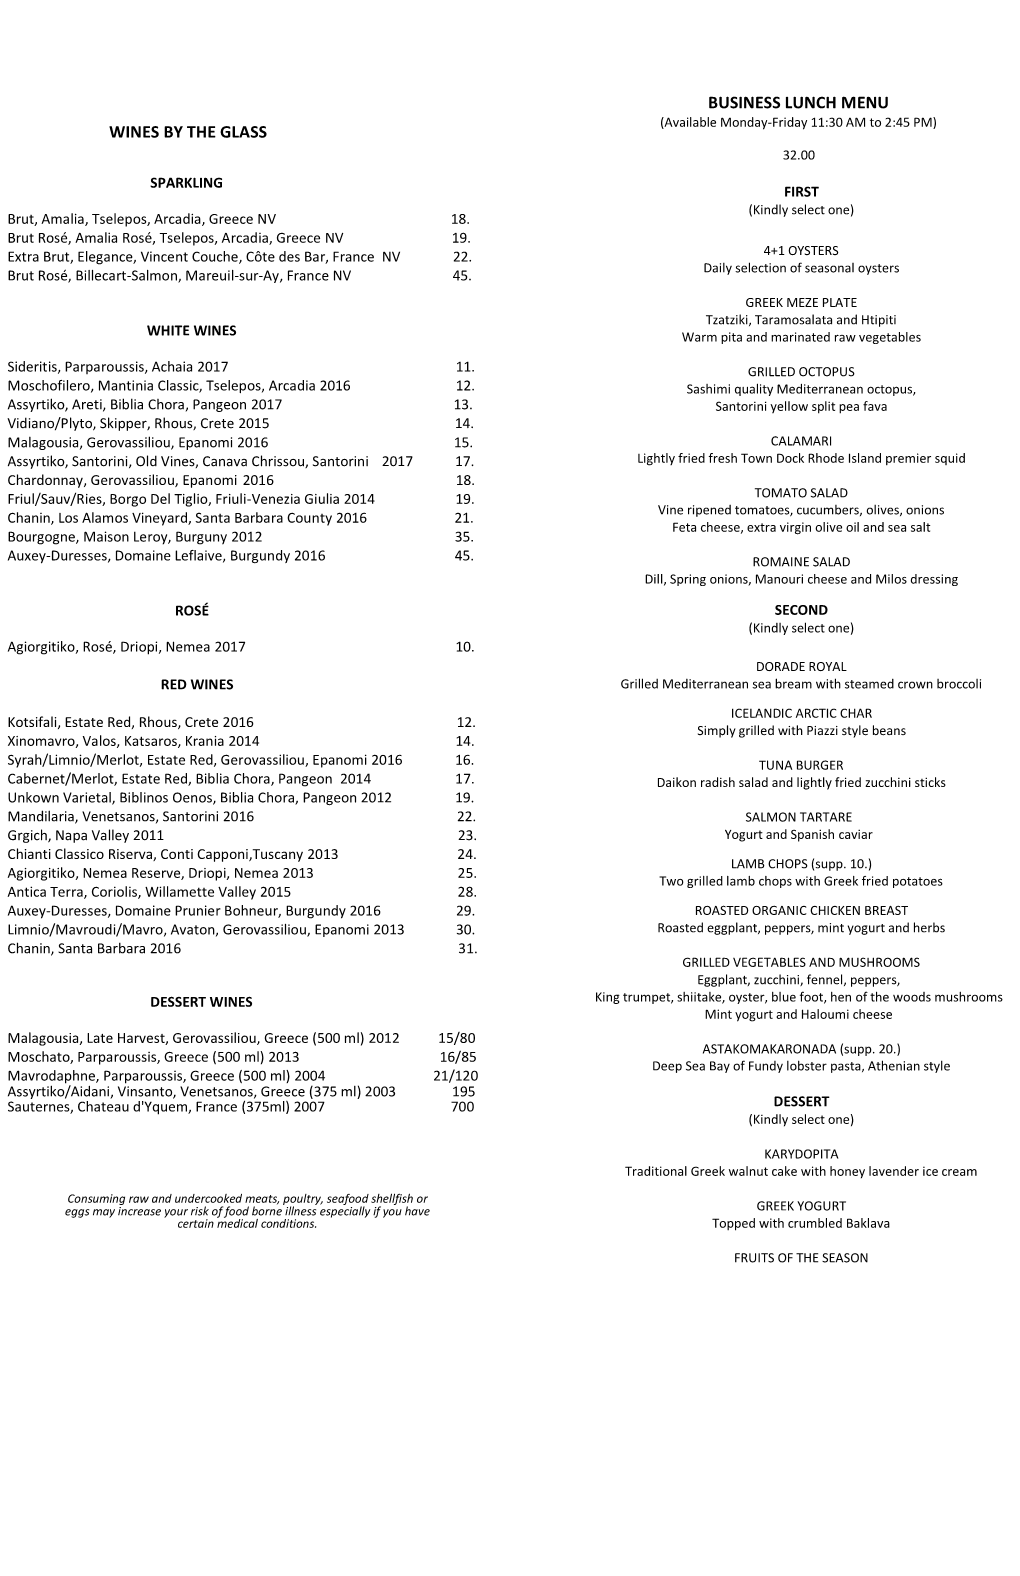 Wines by the Glass Business Lunch Menu